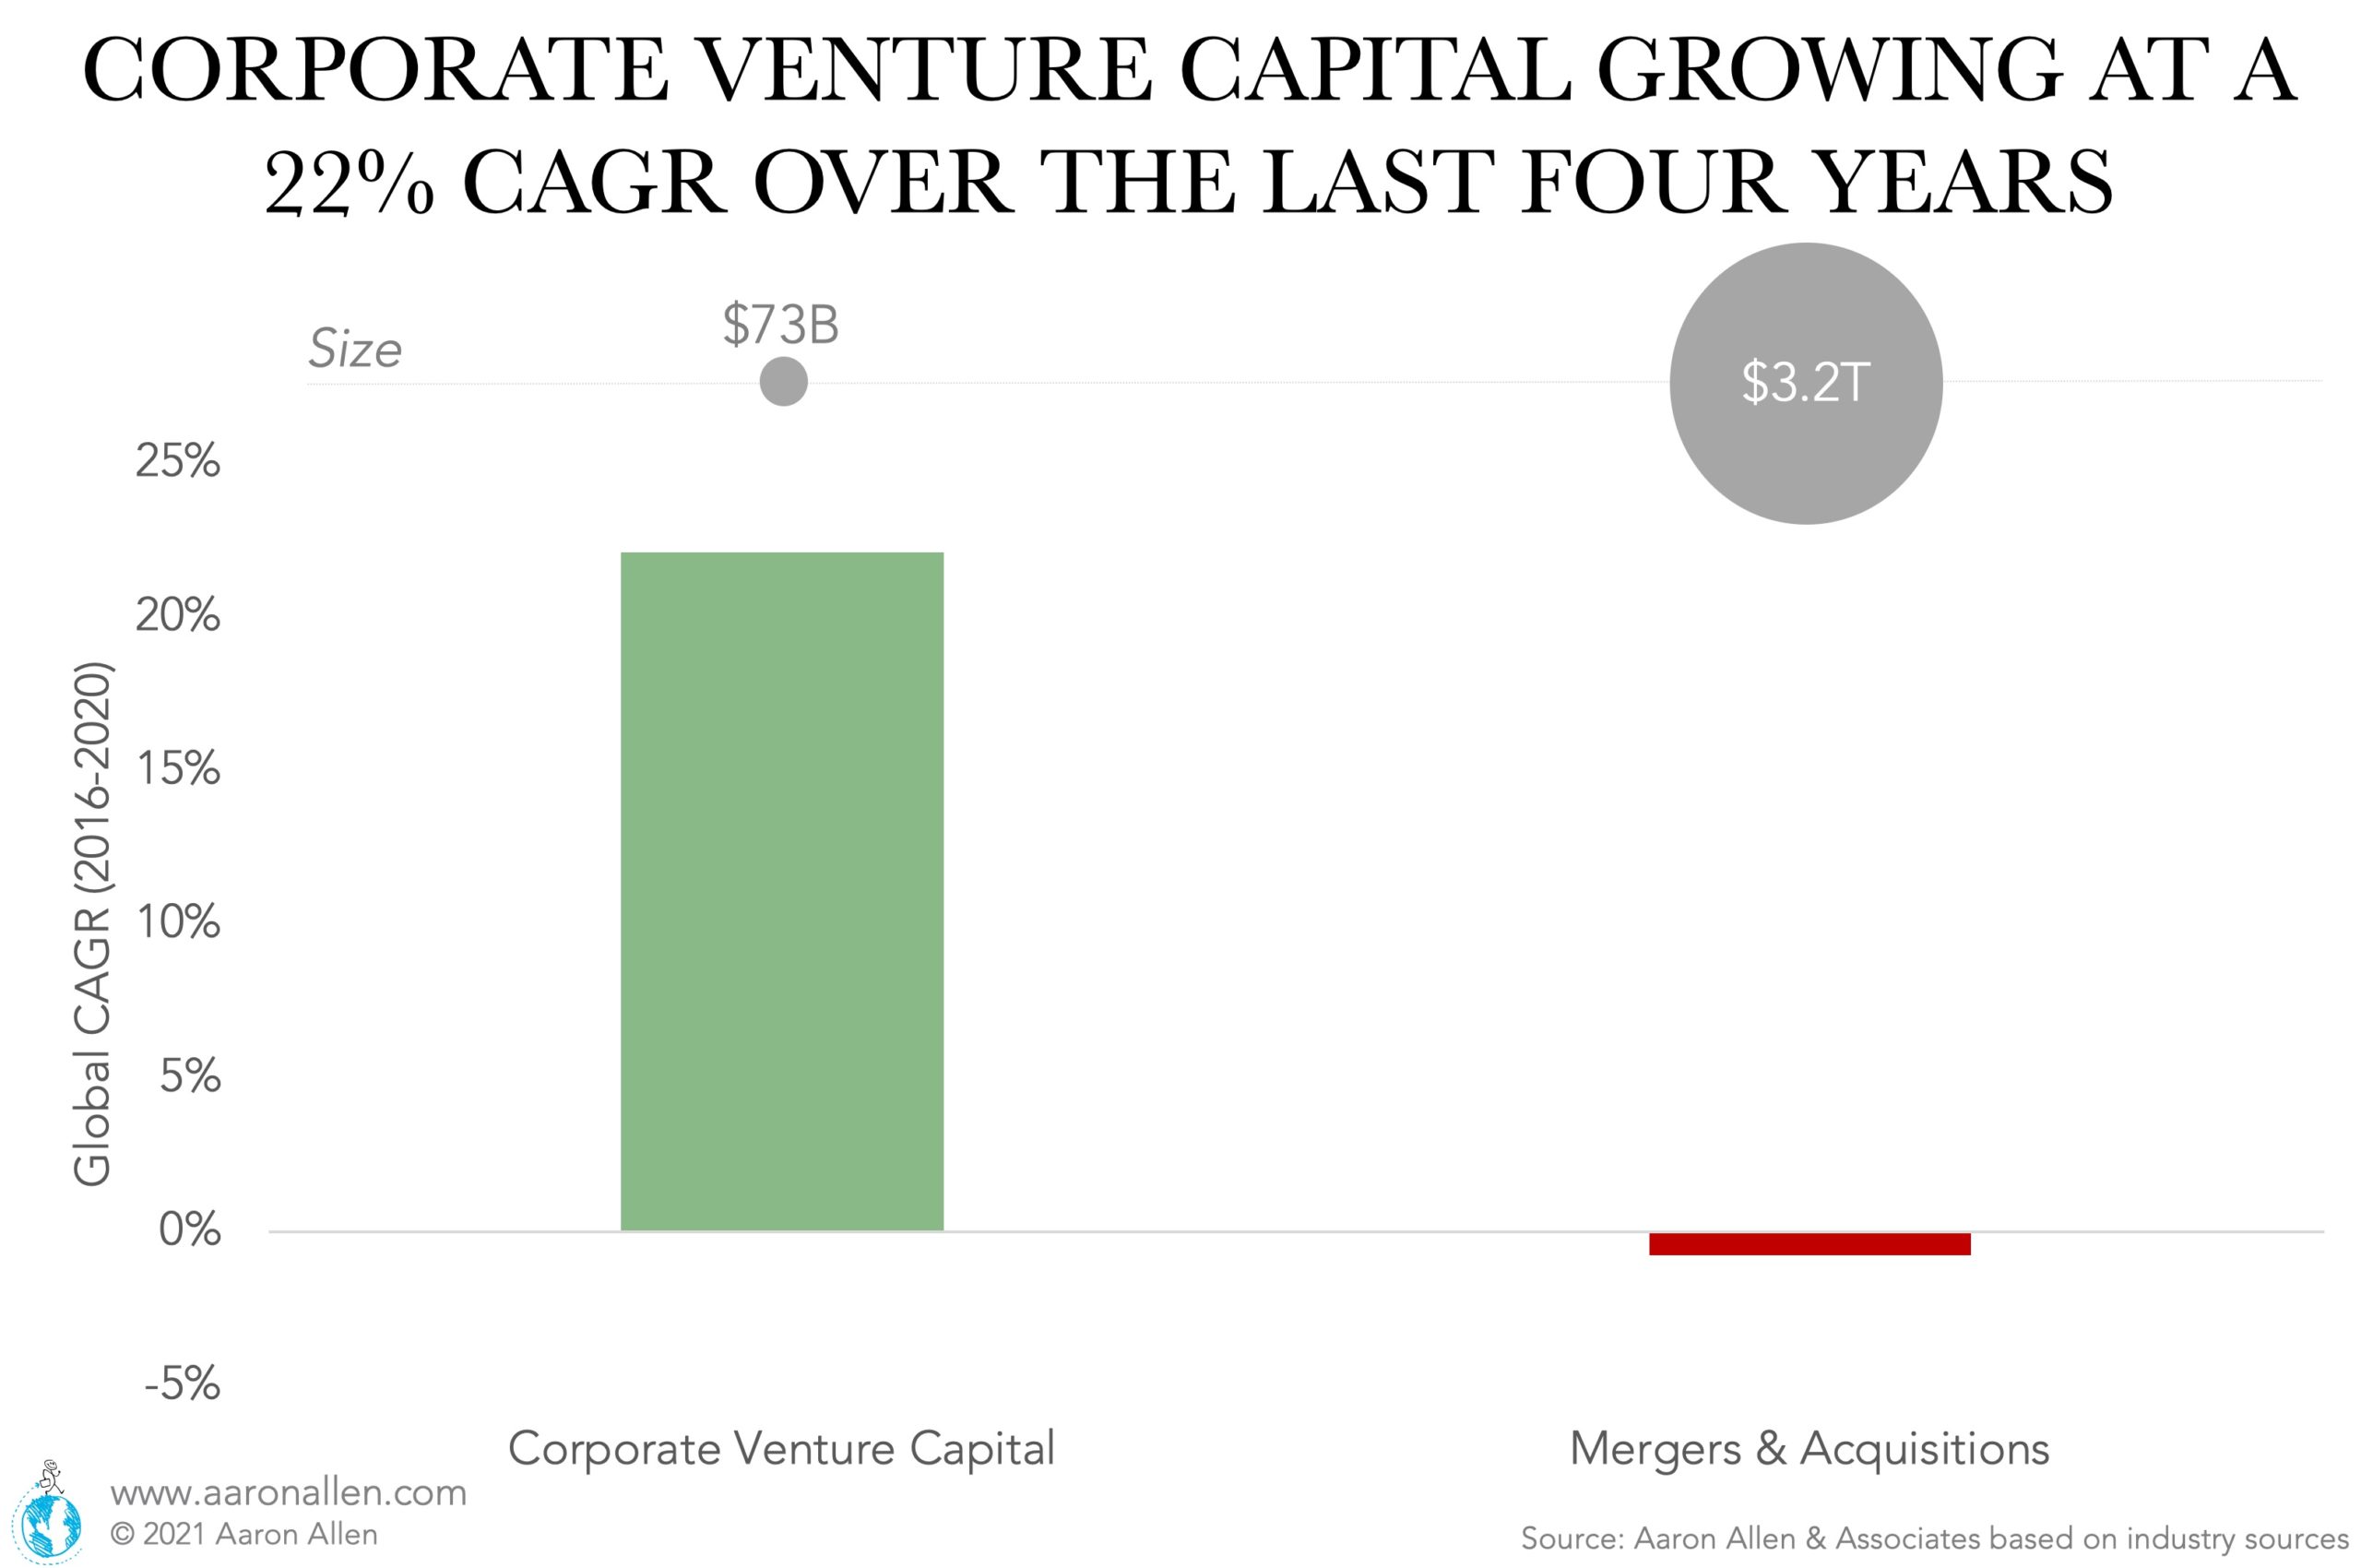 As venture capital has increased in popularity over the past several years, corporations have also gotten in on the game. Global CVC activity has grown at a 22% CAGR over the last four years — in comparison, M&A has been relatively stable at around $3.2 trillion.  While M&A enables companies to access new markets or new products and typically involves companies with a certain trajectory, CVC has more to do with R&D and long-term opportunities with attractive potential.   There are many merits to building a corporate venture capital group, and it’s not just generating future financial returns. The right CVC investment can unlock new layers of growth, open channel expansion opportunities, or drive improved systemwide efficiencies through new technologies. Especially in foodservice, industry expertise is key to identify attractive targets (that offer the possibility to mitigate risk) and to assist in the development phase to go from a minimum viable product to exactly what restaurant operators need and want.